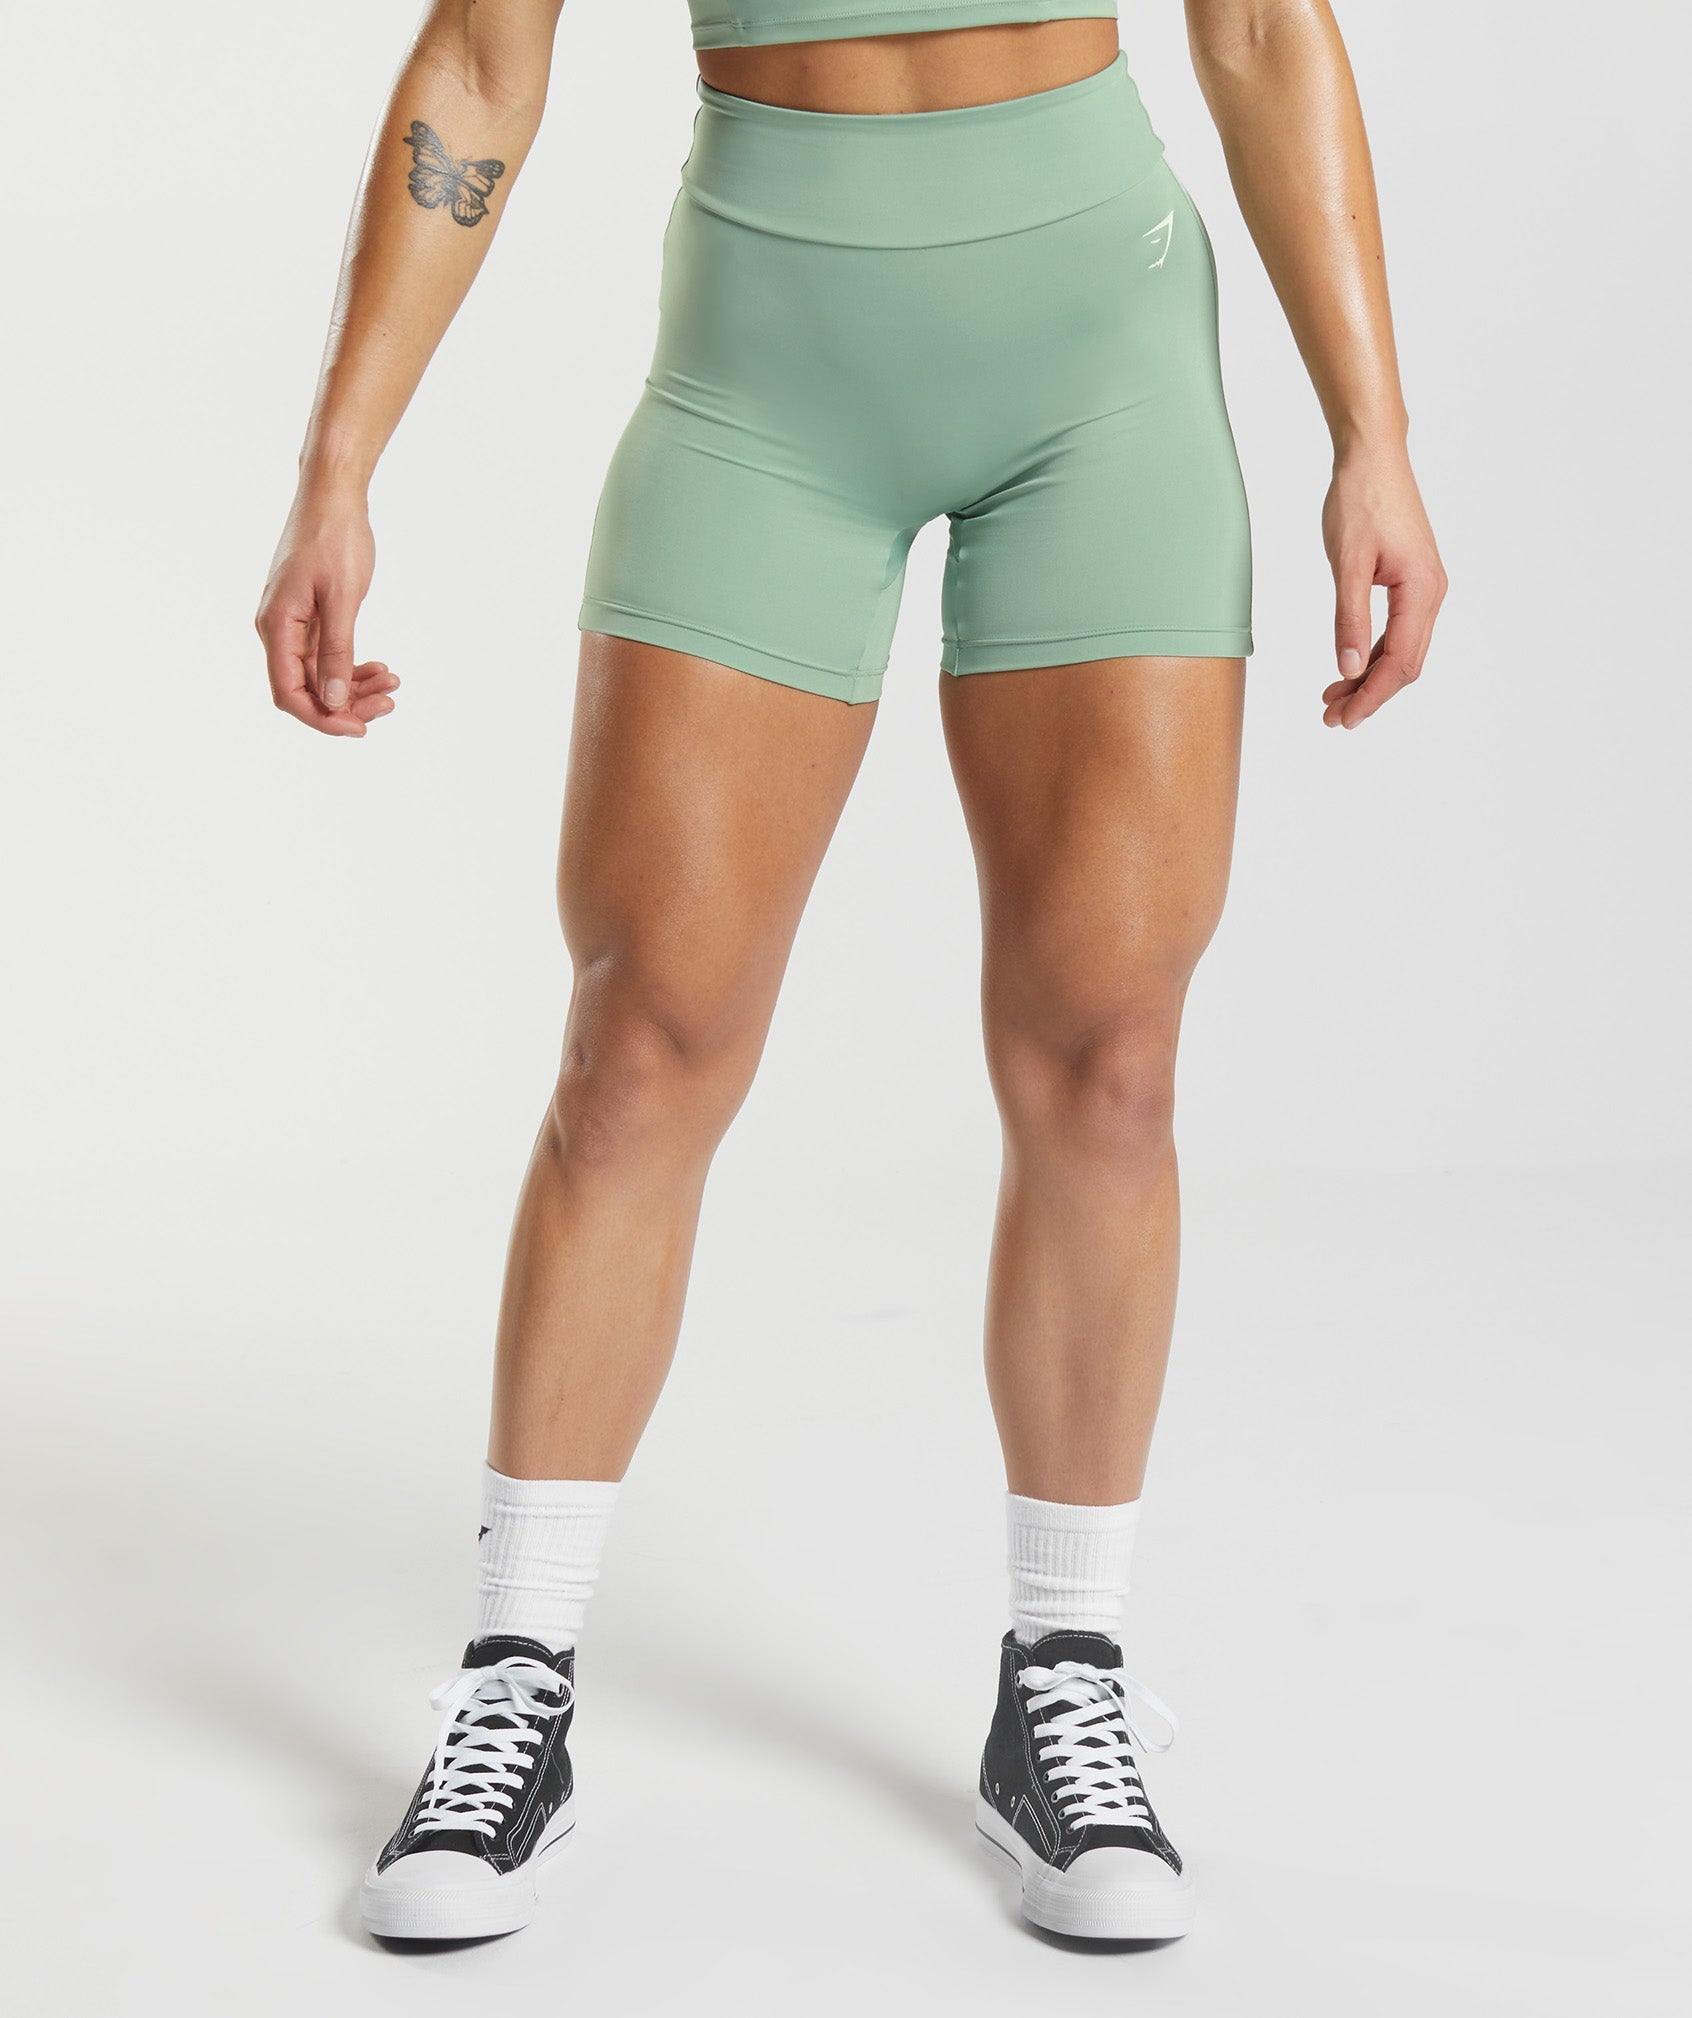 A CURVY GIRLS GUIDE TO GYM SHORTS! Gymshark, Oner, Ryderwear and